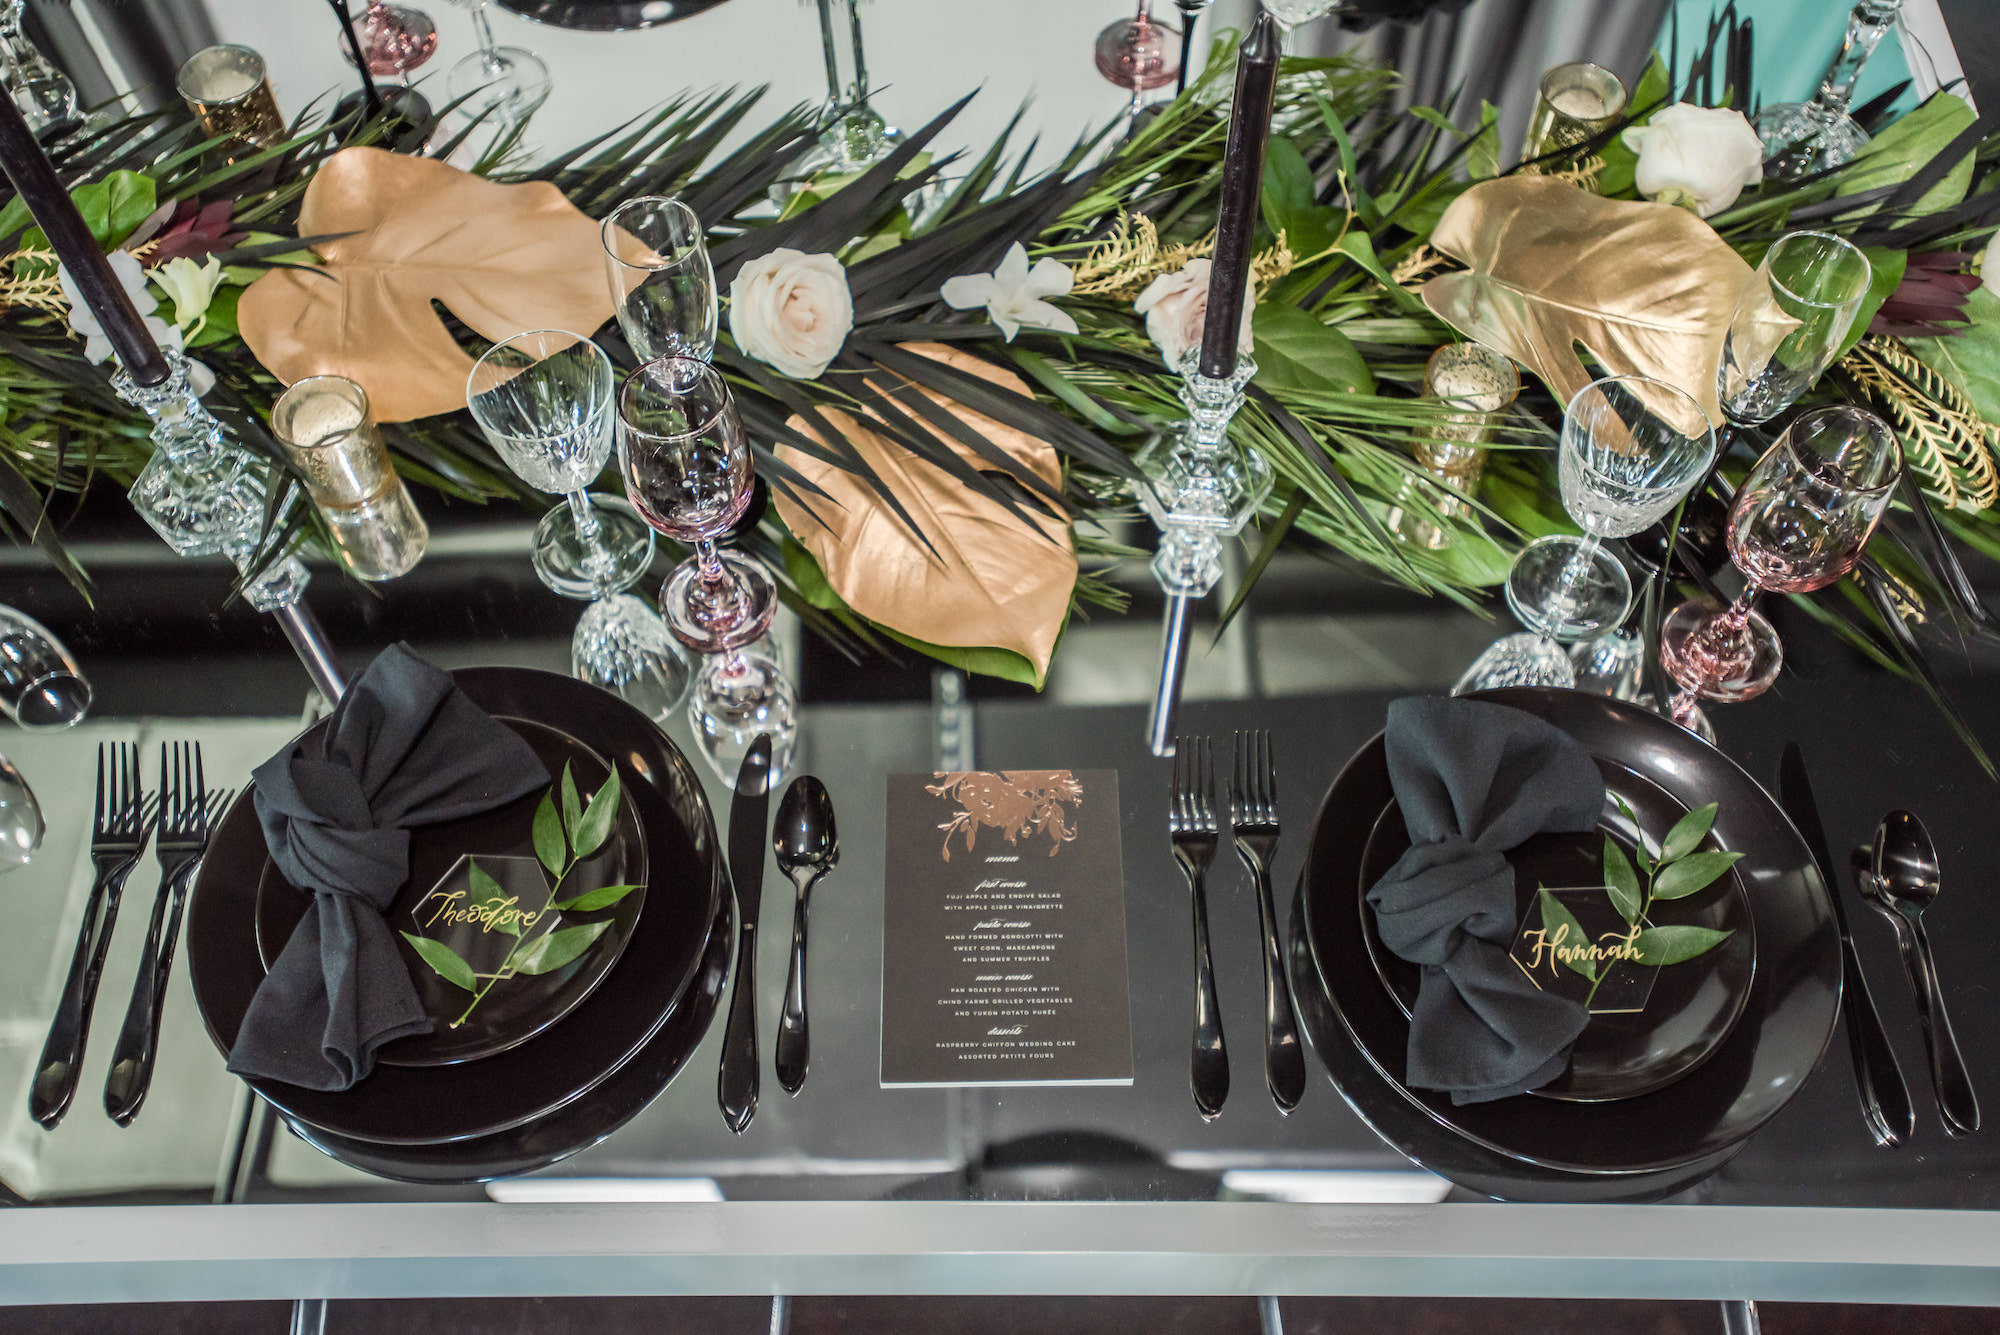 Dark Luxe, Romantic Wedding Reception Styled Shoot Decor, Black Tableware, Gold Painted Monstera Leaves, Palm Fronds, Blush Pink Roses Table Runner, Acrylic and Gold Script Font Seating Place Cards | Tampa Bay Wedding Planner Elegant Affairs by Design